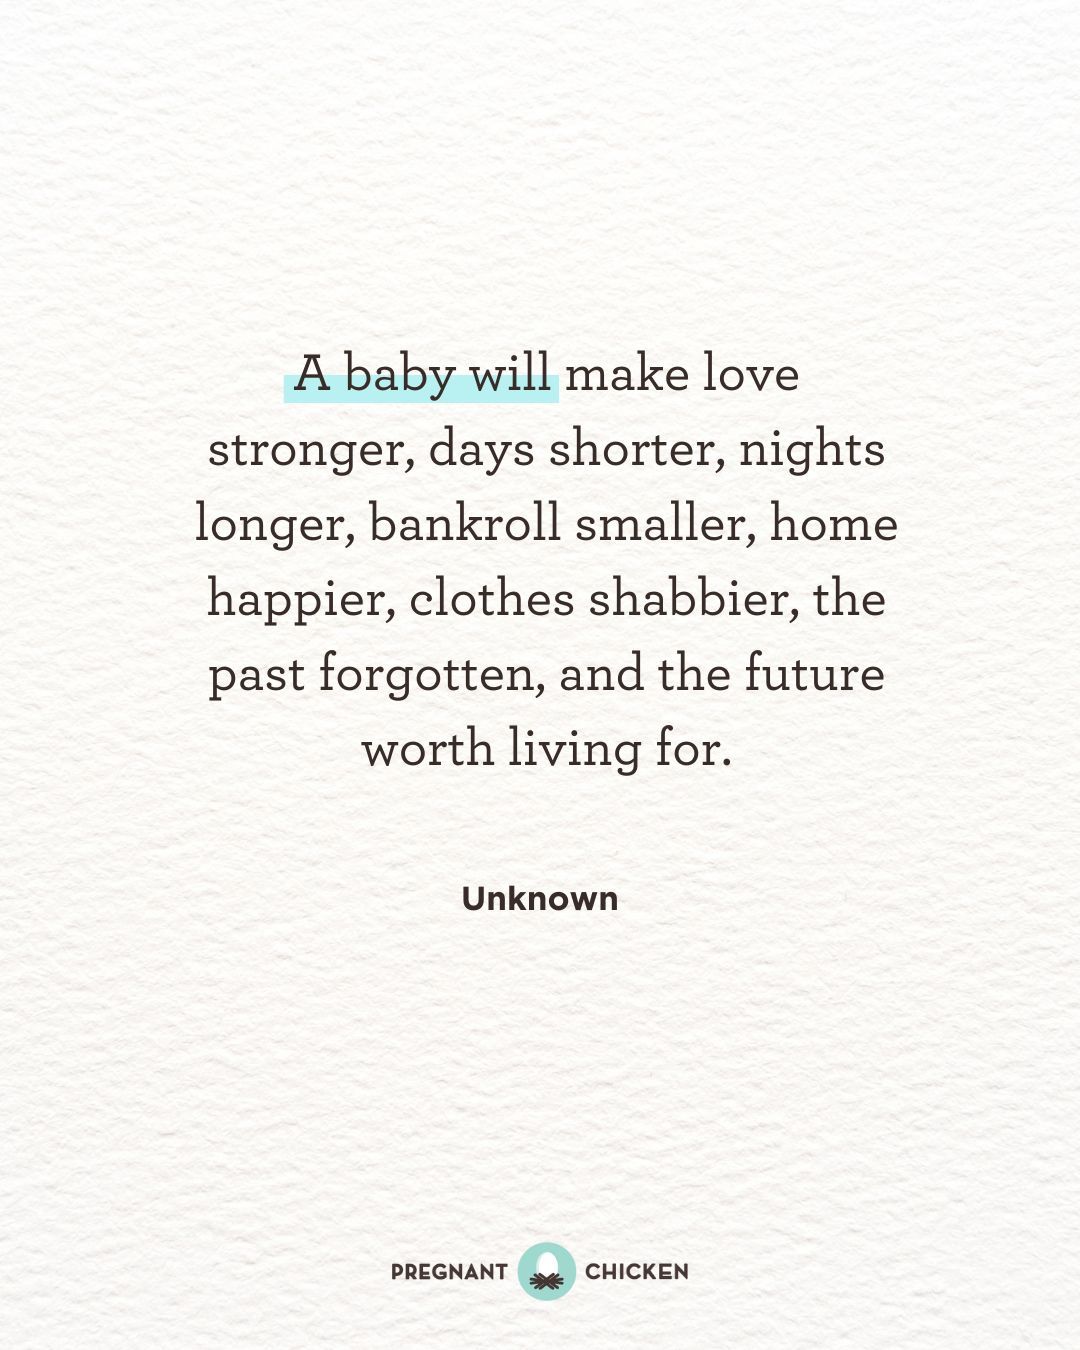 A baby will make love stronger, days shorter, nights longer, bankroll smaller, home happier, clothes shabbier, the past forgotten, and the future worth living for.